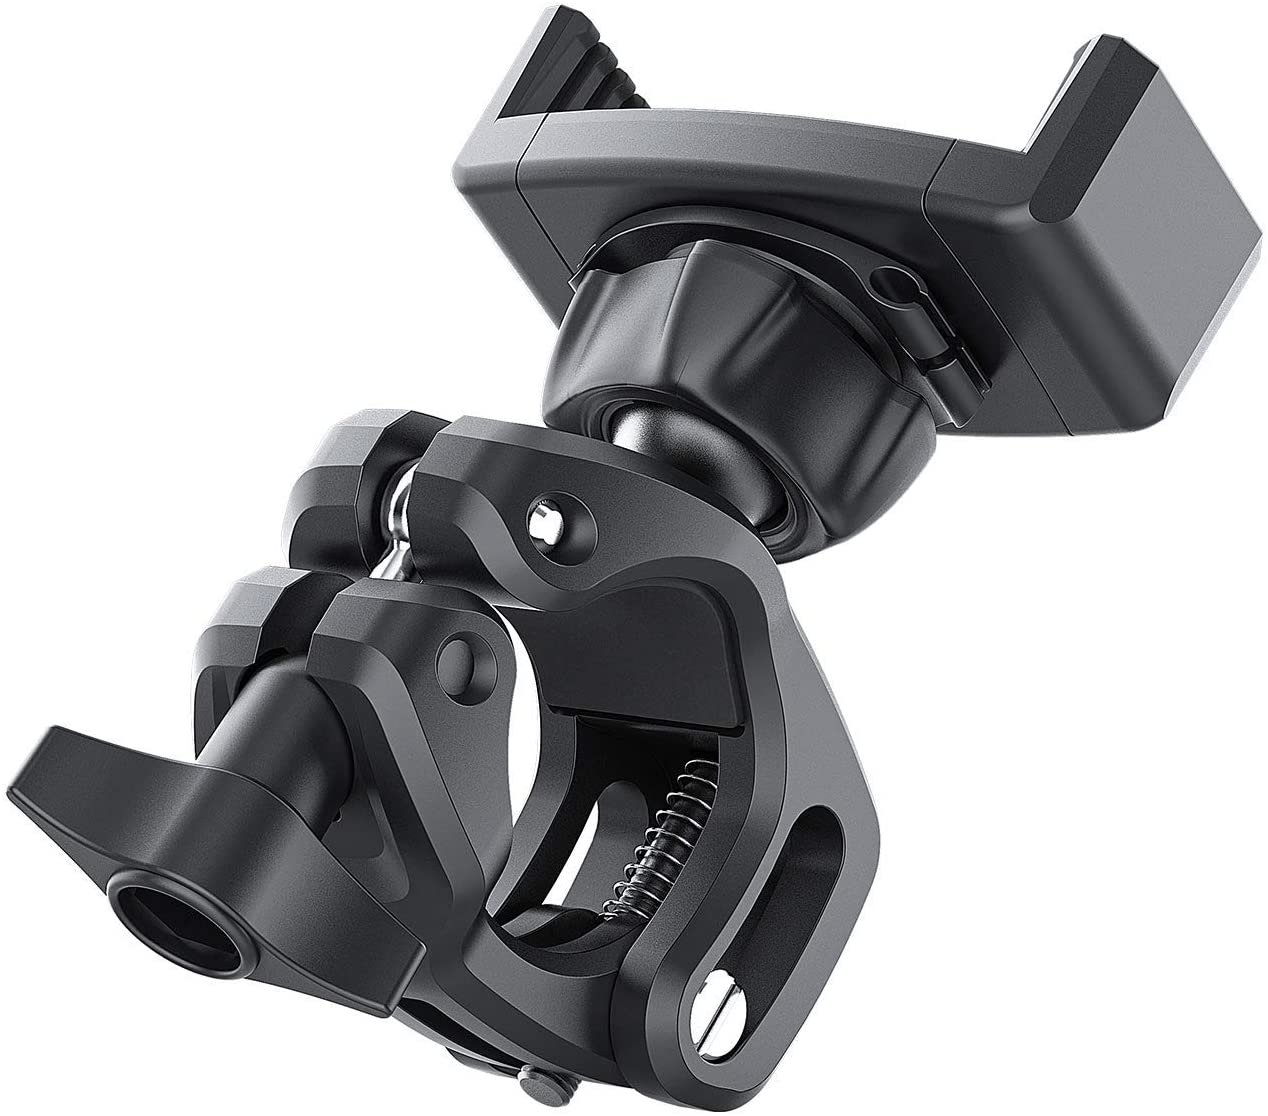 WixGear Universal Bike Phone Holder and Motorcycle Phone Mount